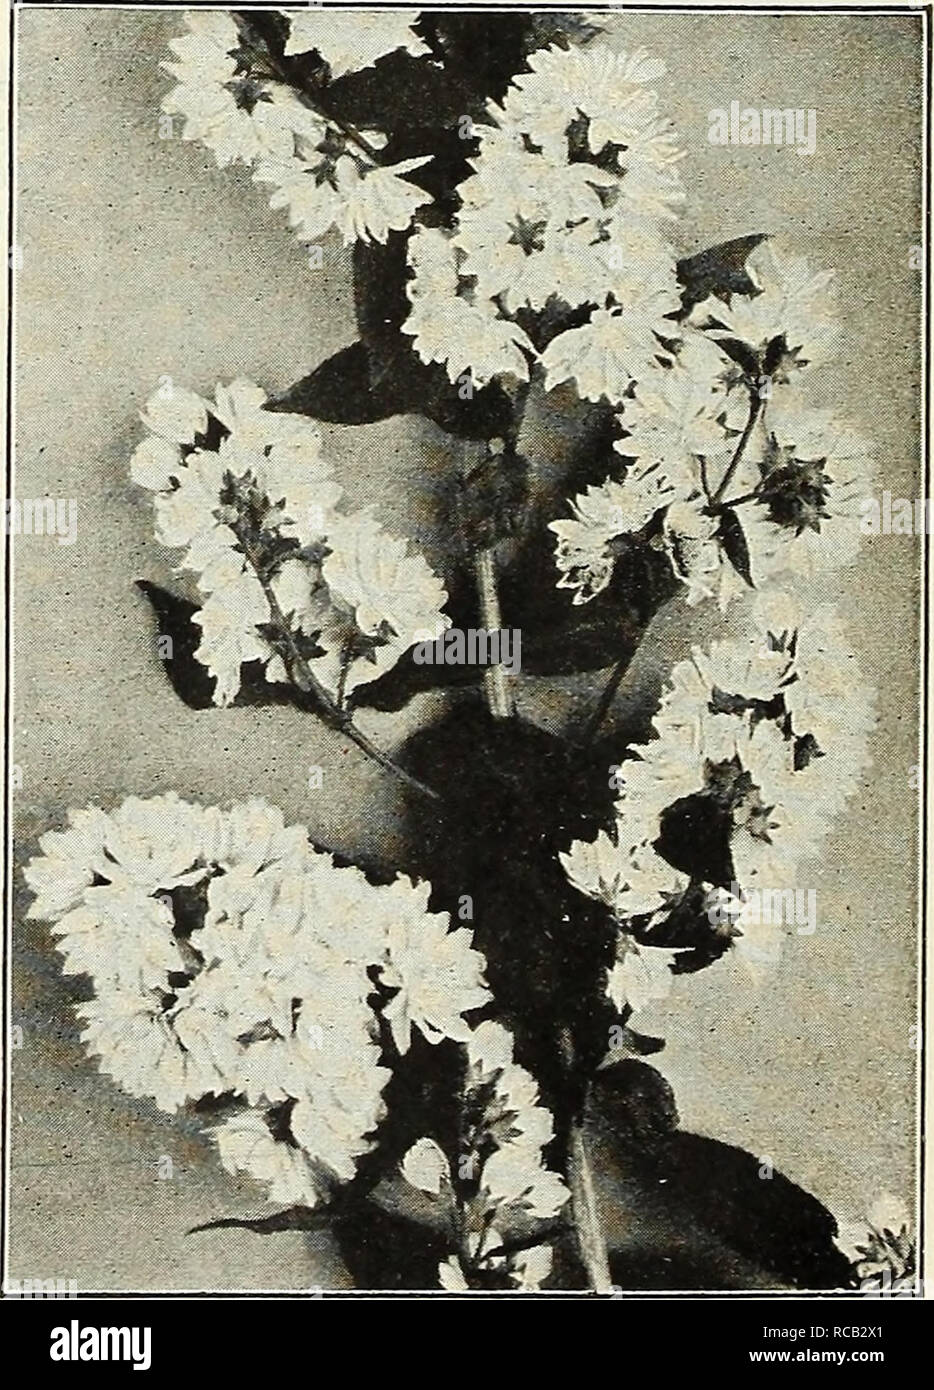 . Dreer's bulbs 1921. Flowers Seeds Catalogs; Bulbs (Plants) Seeds Catalogs; Nurseries (Horticulture) Catalogs; Gardening Equipment and supplies Catalogs. Callicarpa Purpurea Callicarpa Purpurea. A splendid berried Shrub for the border or planted in clumps on the lawn; it grows about 3 feet high, its branches gracefully recurving; these are cov- ered in August with tiny pink-tinted flowers, followed in late September by great masses of violet-purple berries, borne in clusters from the axil of every leaf, these remain on the plant until mid-winter. All fall berried plants are useful and attrac- Stock Photo